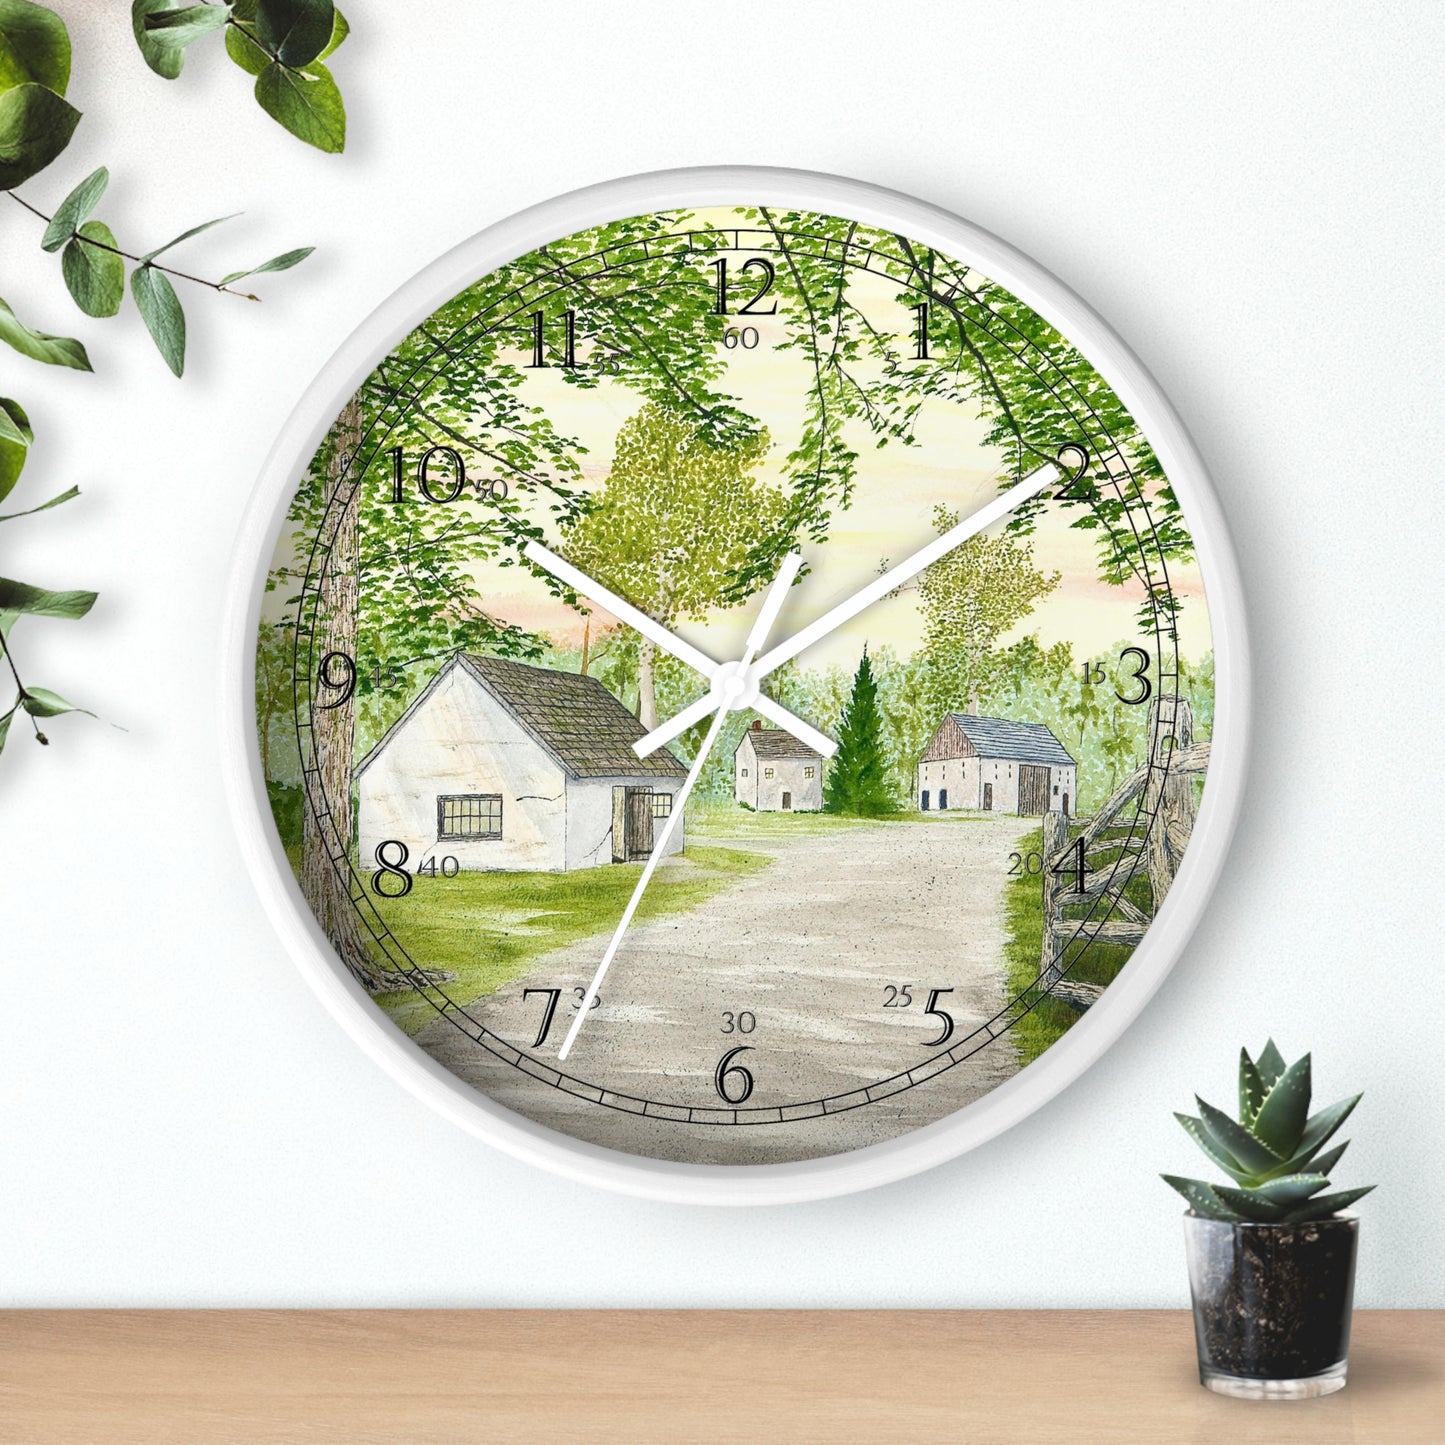 Country Lane and Fence English Numeral CLock